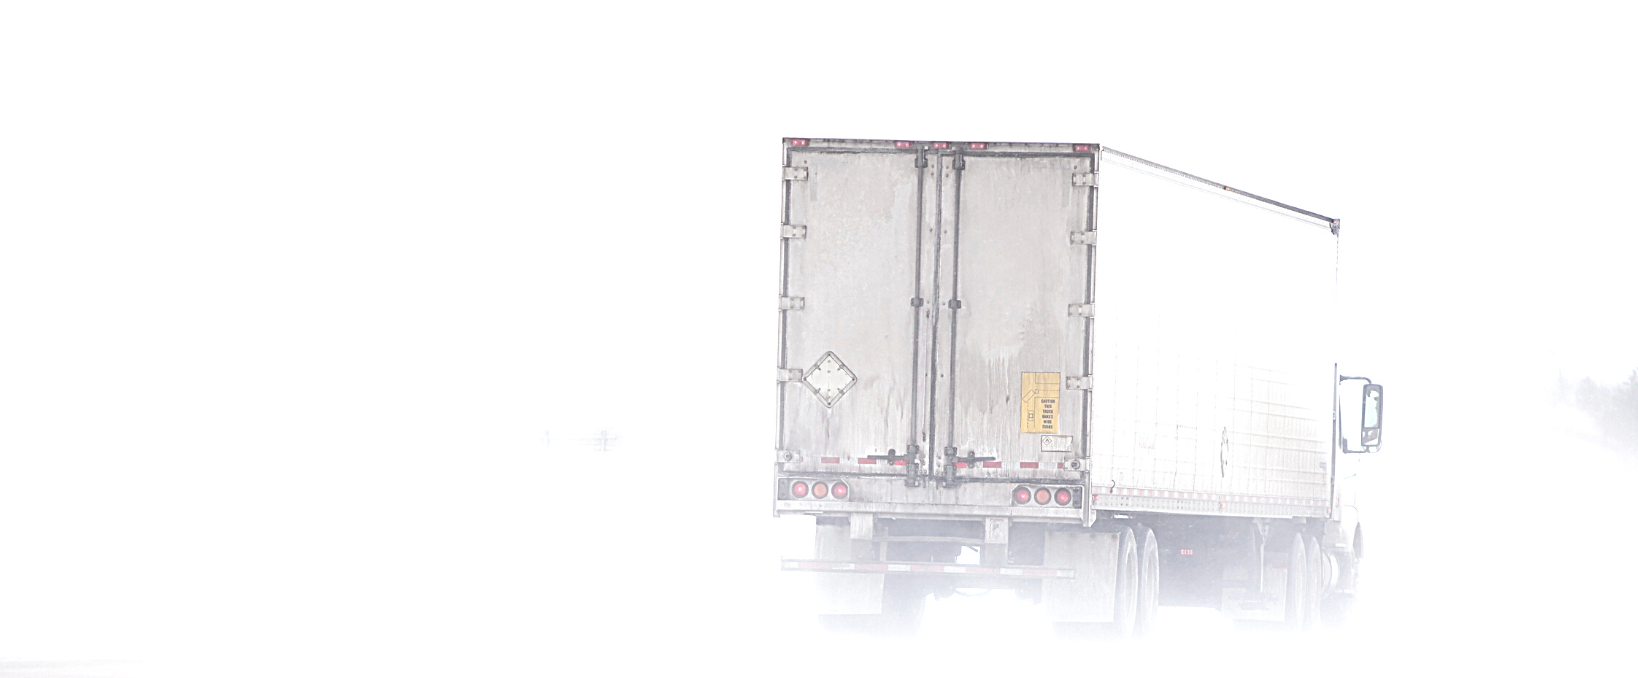 trucking in winter snow icy black ice united states and canada tips, image of a semi truck